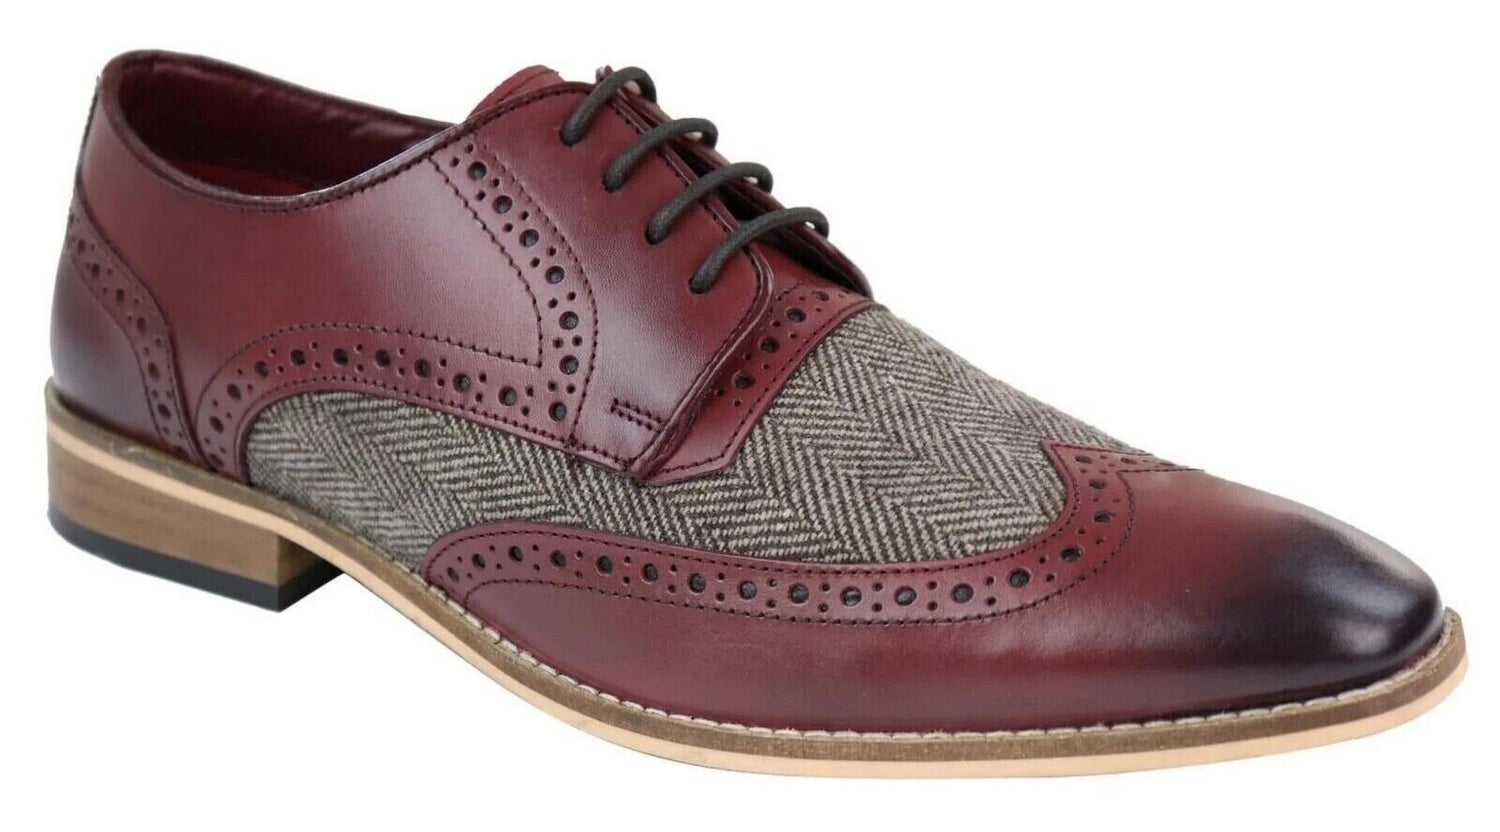 Mens Classic Oxford Tweed Brogue Derby Shoes in Burgundy Leather - Upperclass Fashions 